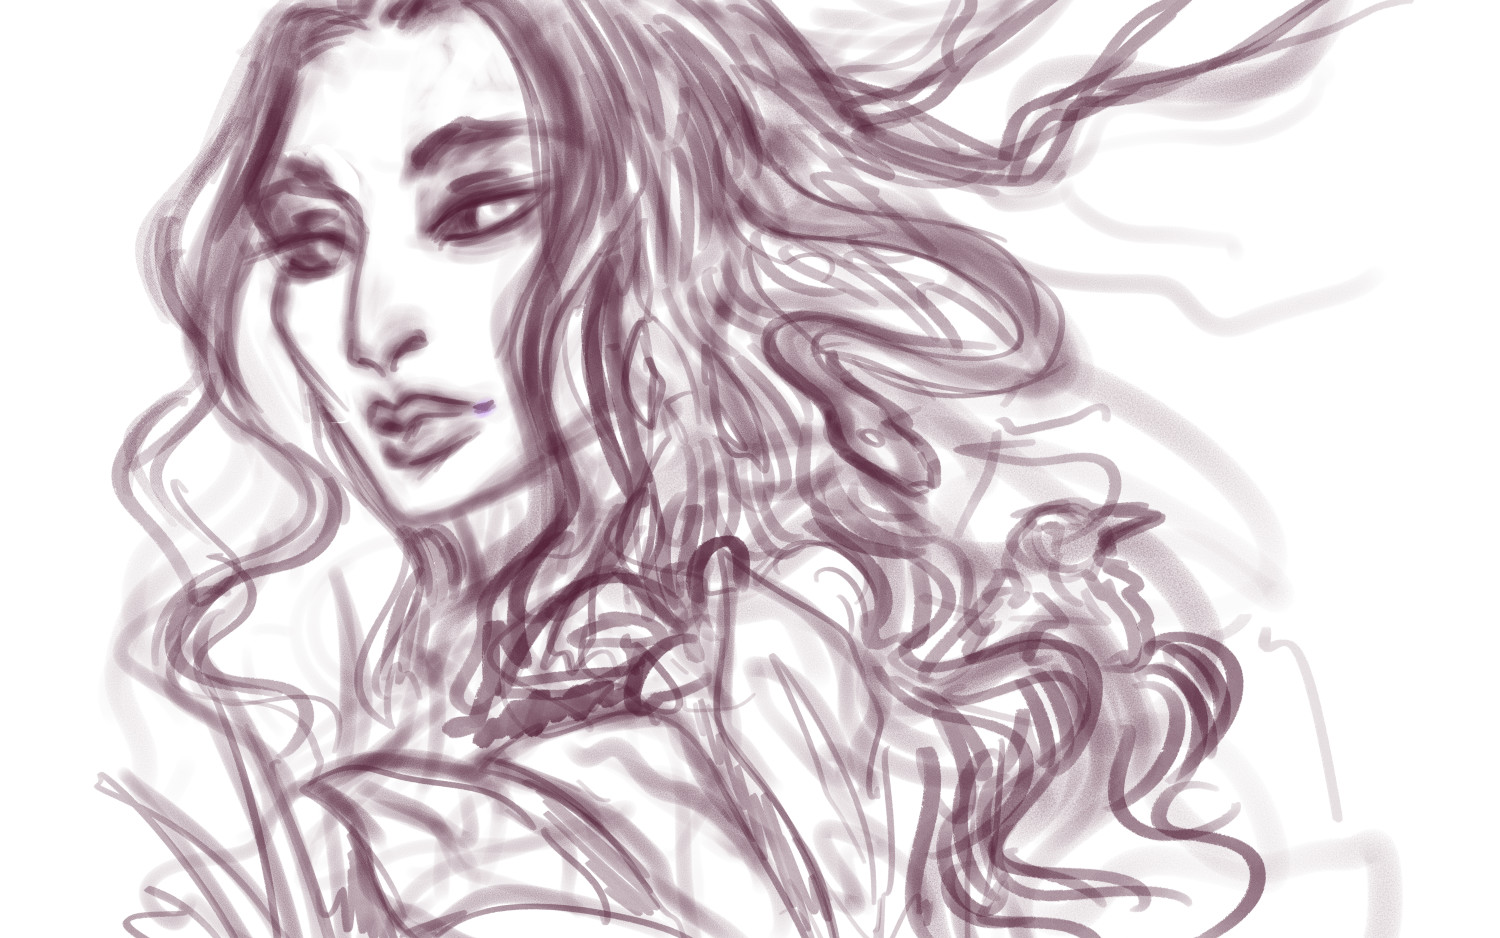 Original rough sketch. The hair details had more life and character, so I may revisit this piece in the future to add something to her wild character